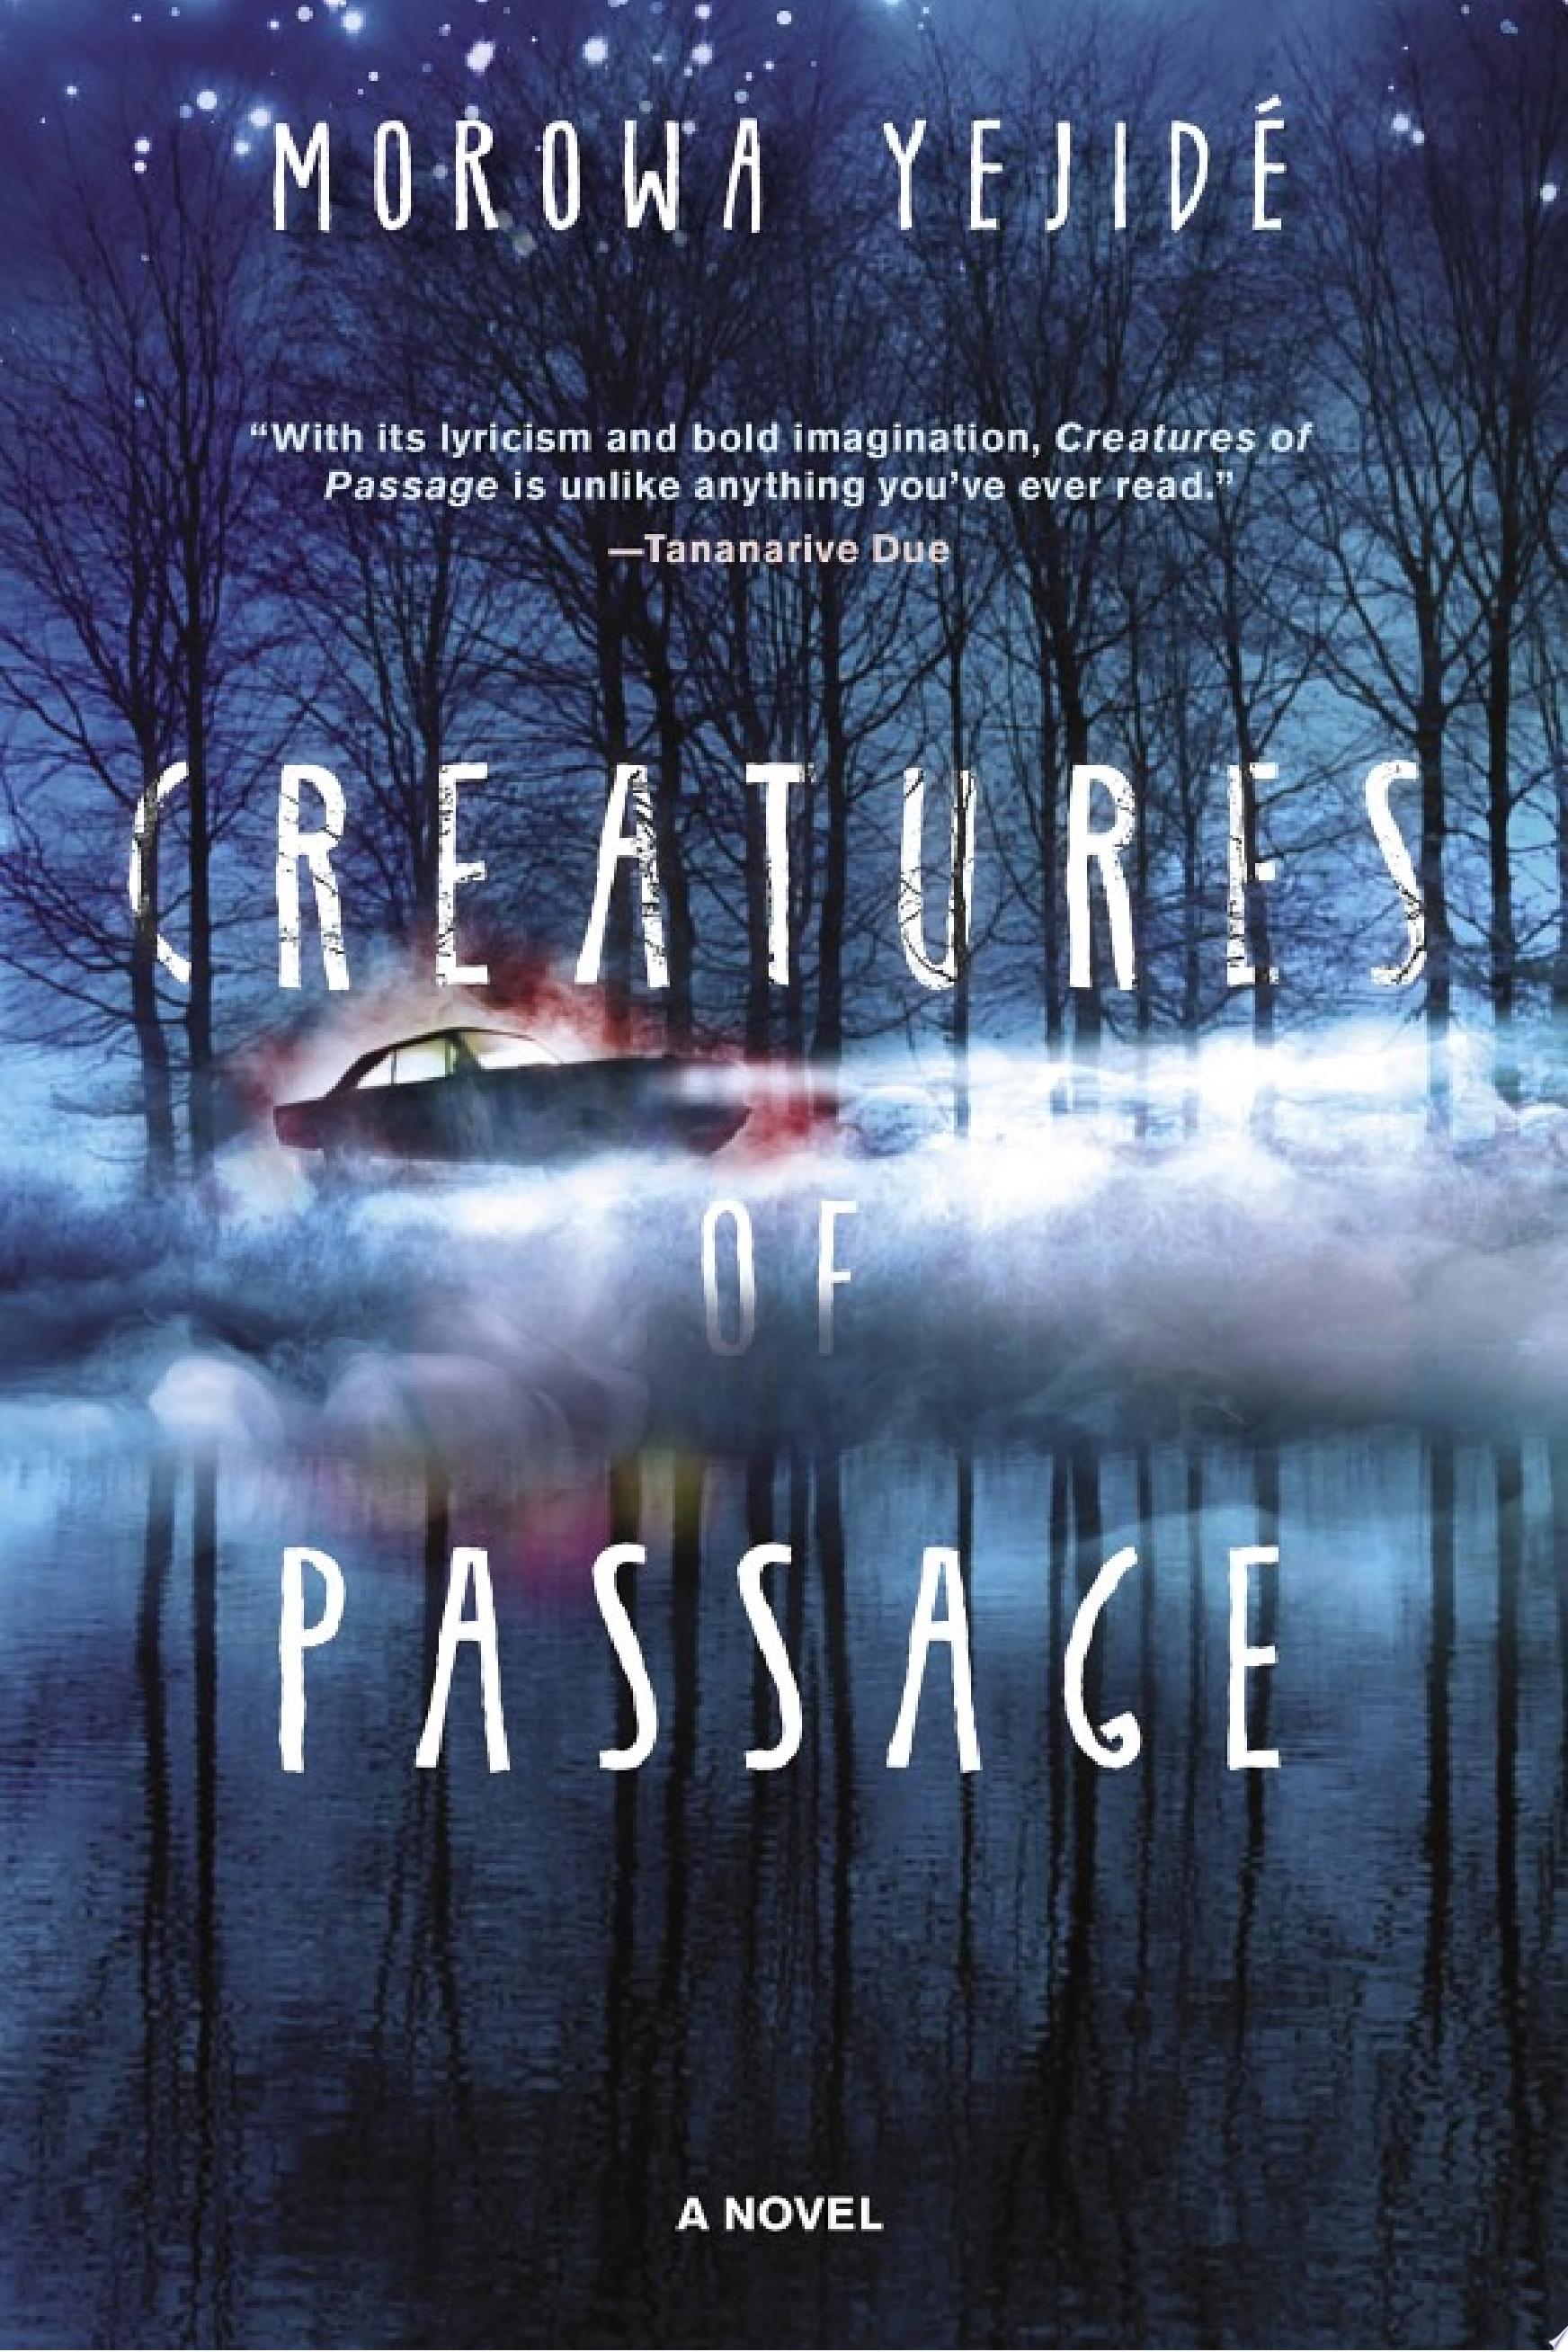 Image for "Creatures of Passage"